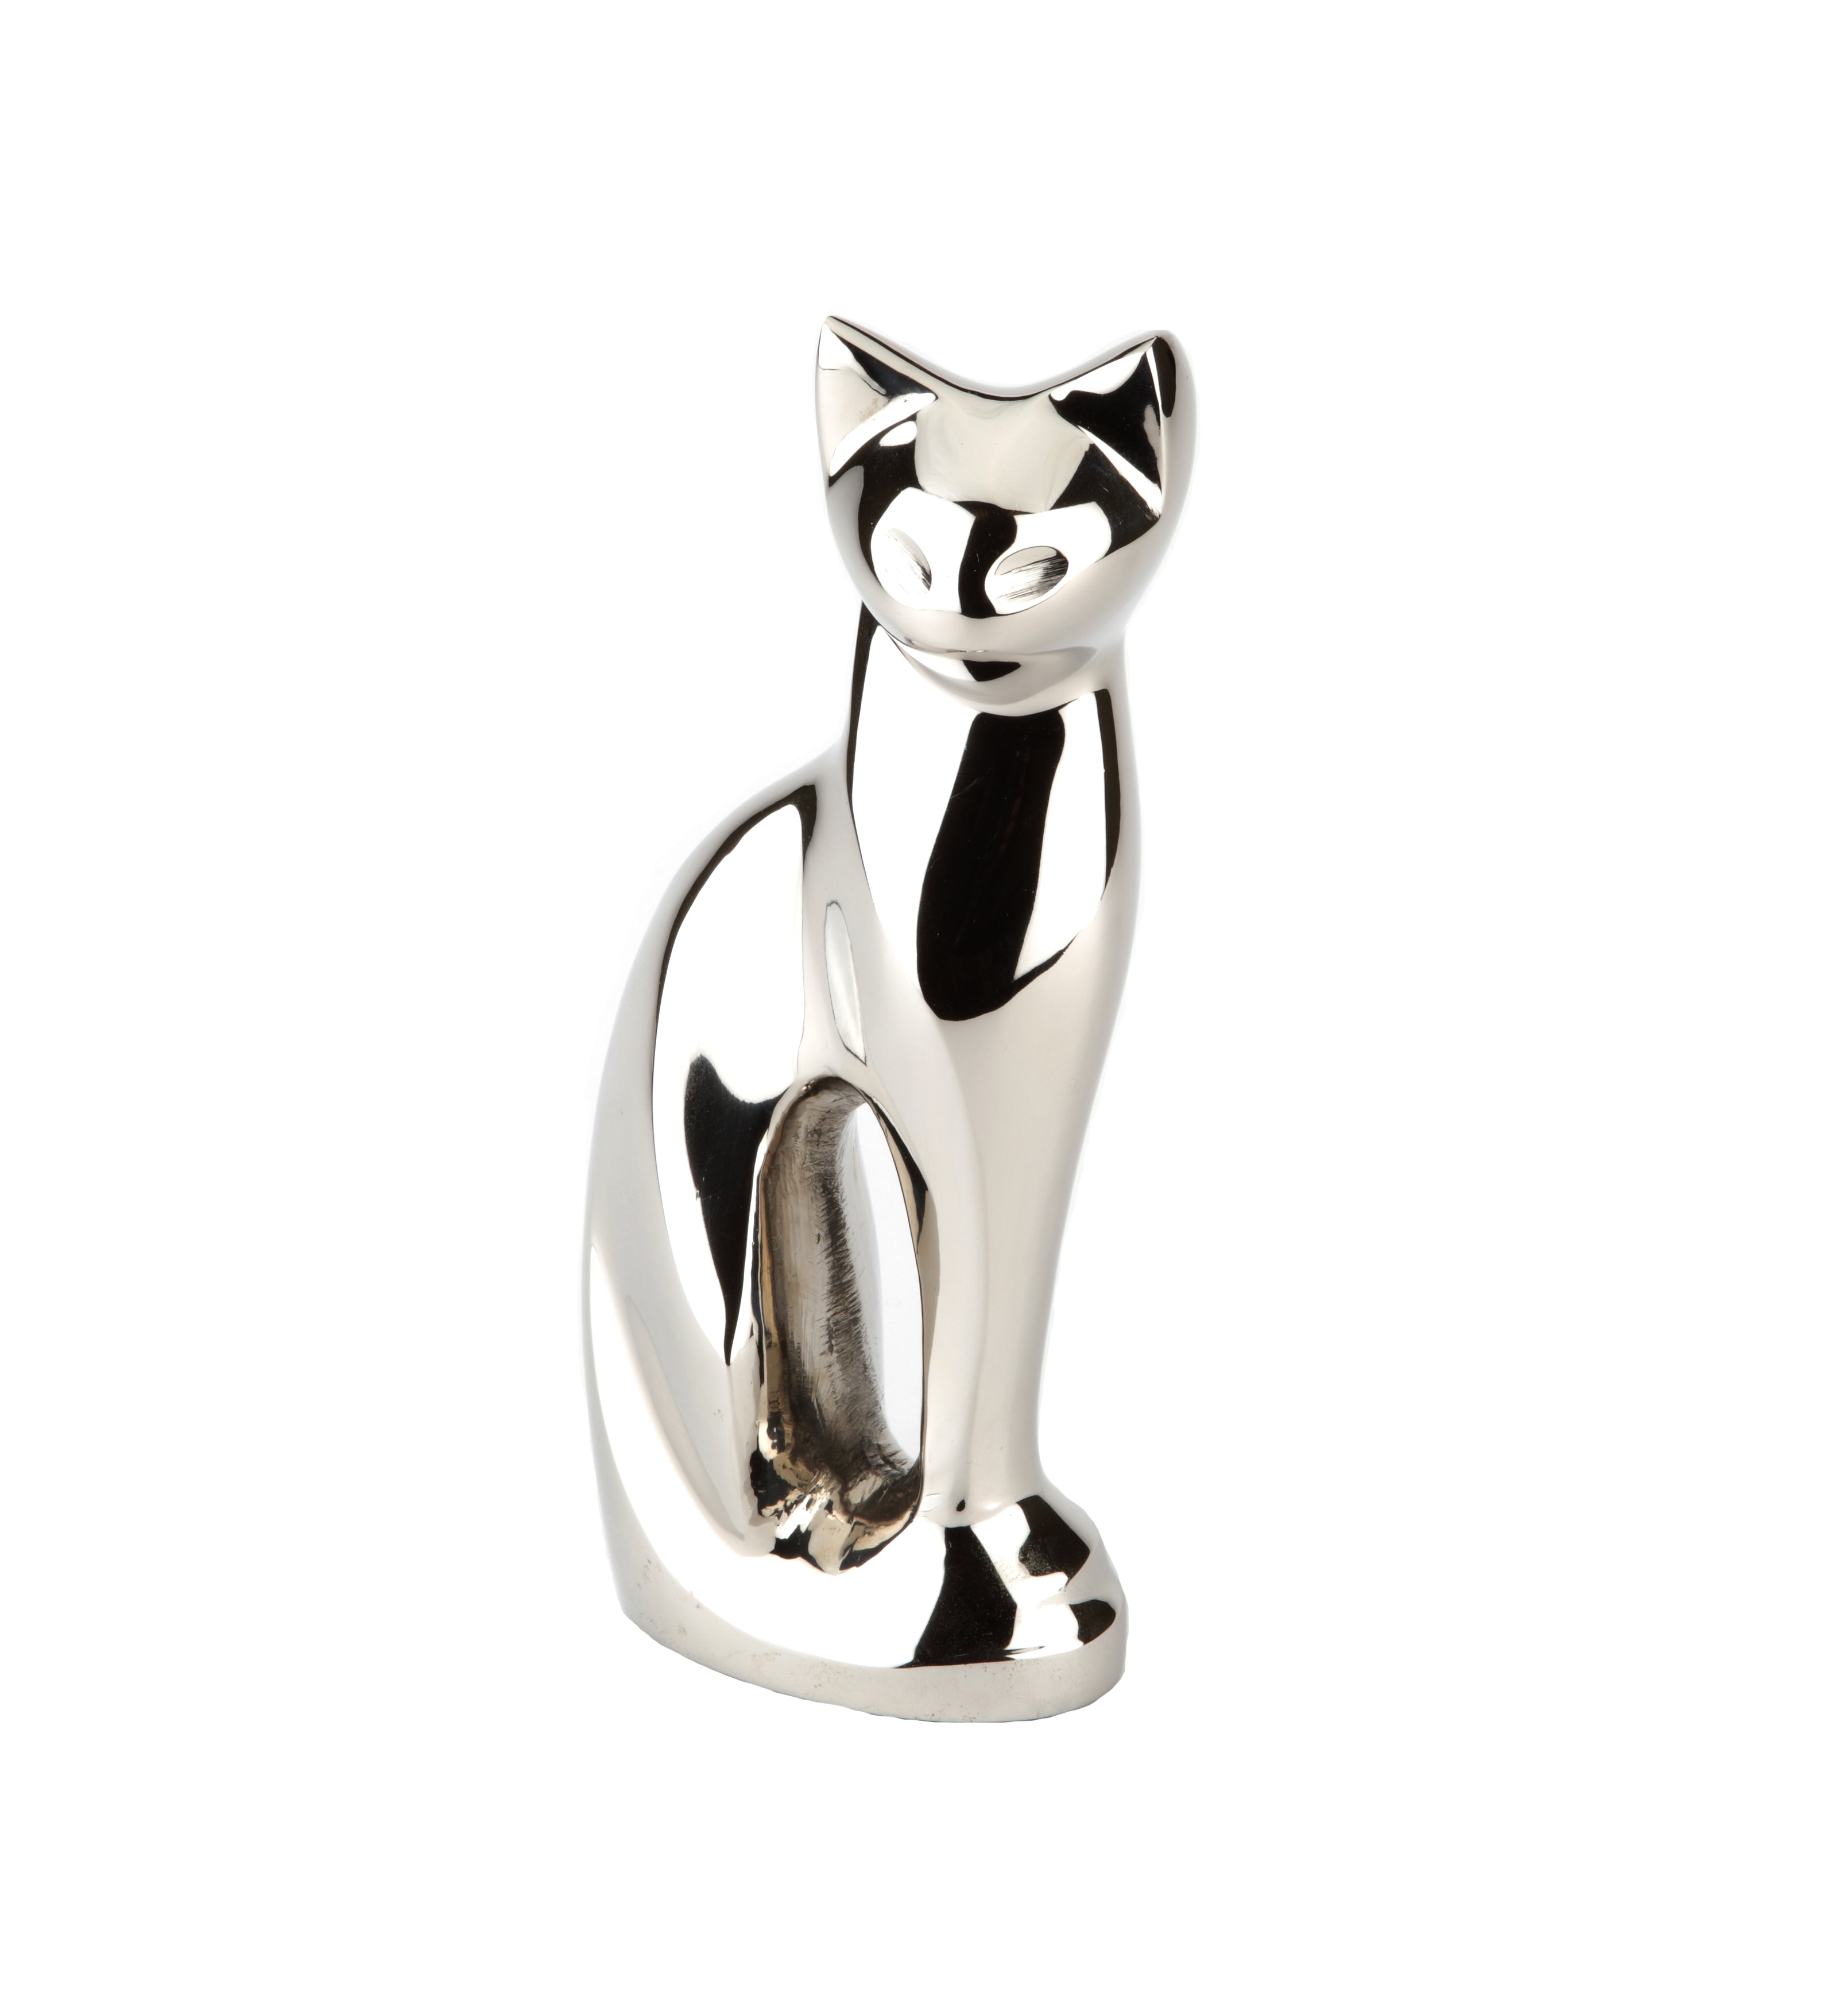 BEAUTIFUL PET URNS FOR ASHES TO COMMEMORATE YOUR PET'S LIFE